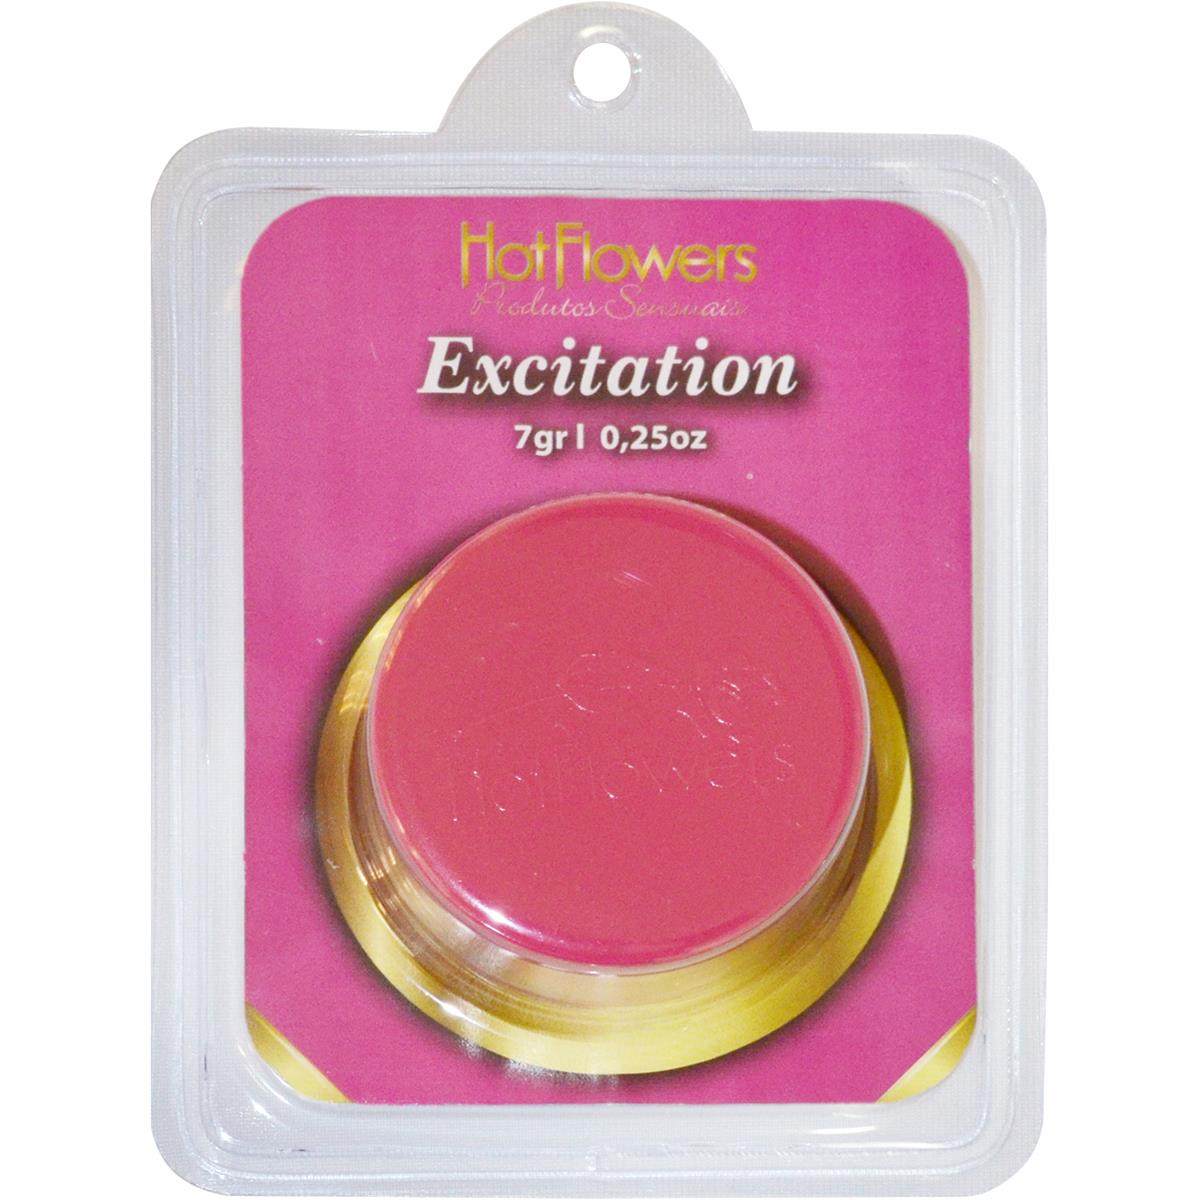 Excitation 7g Hot Flowers - Miess